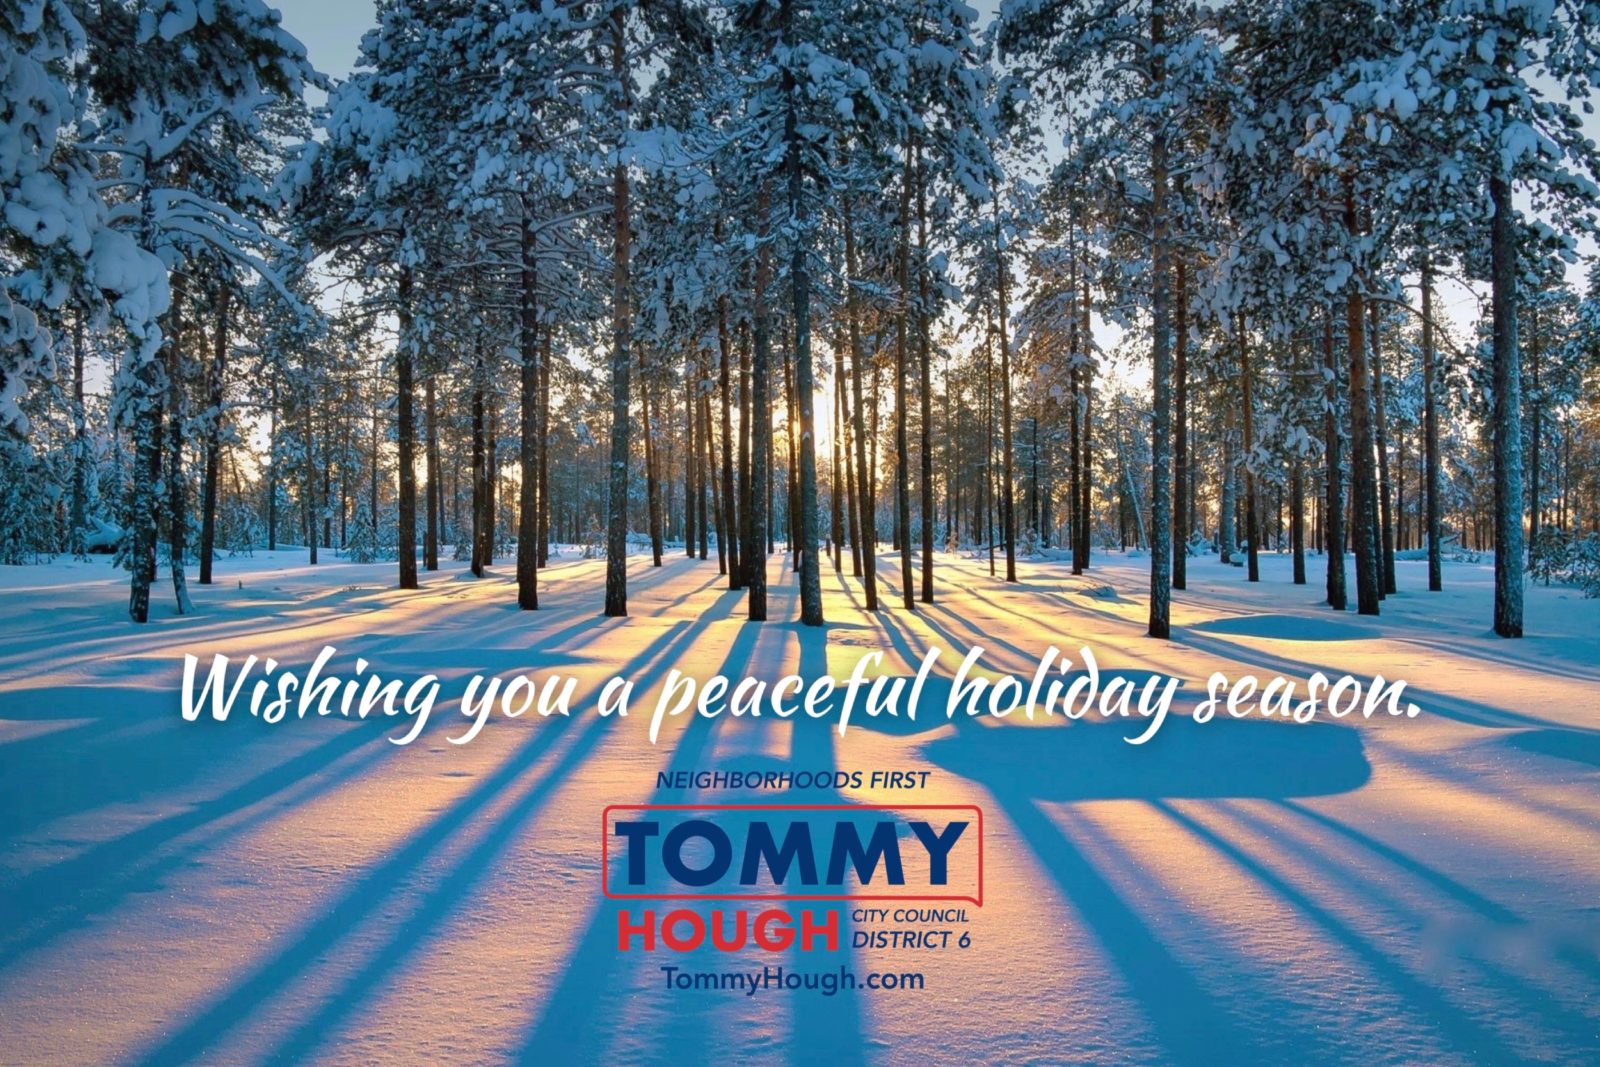 Tommy Holiday Greeting 122021 2